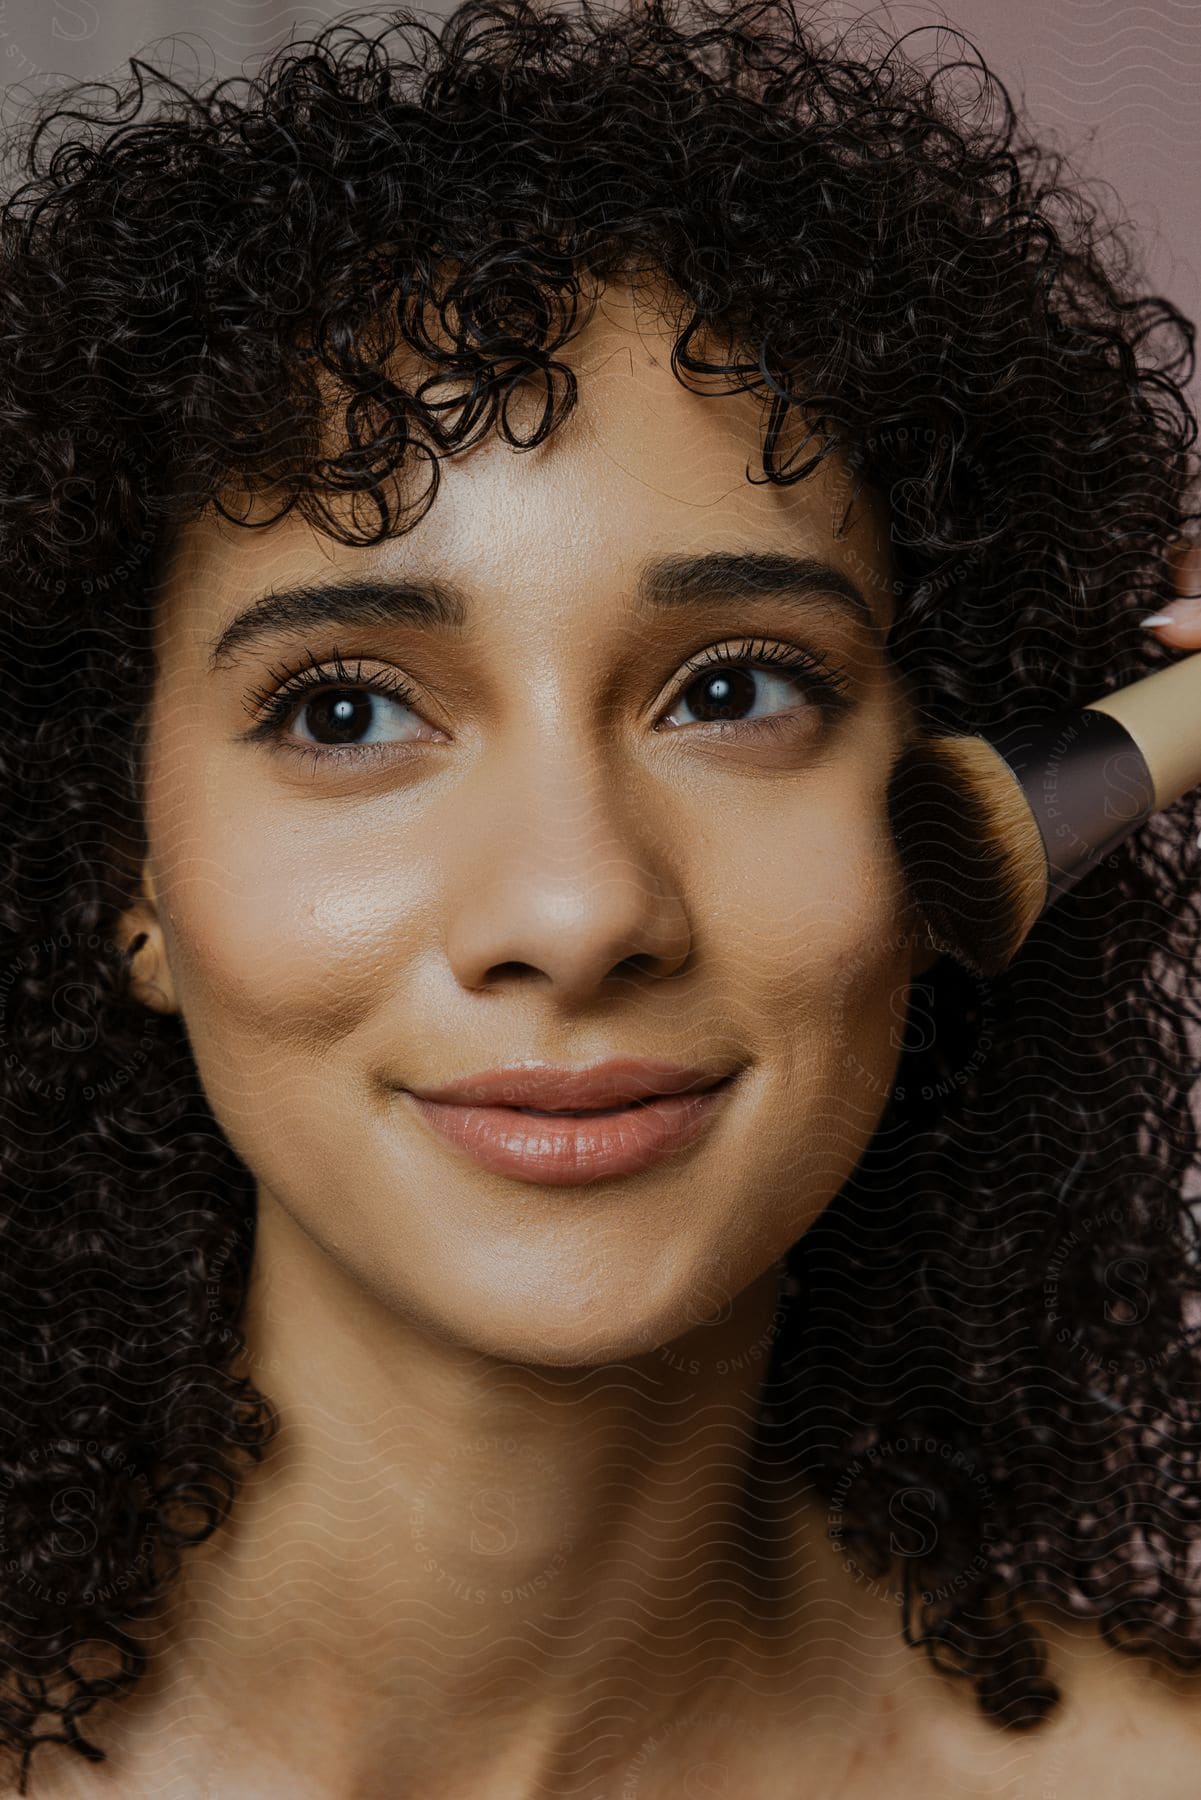 Portrait of a young woman with curly hair applying makeup brush to her face